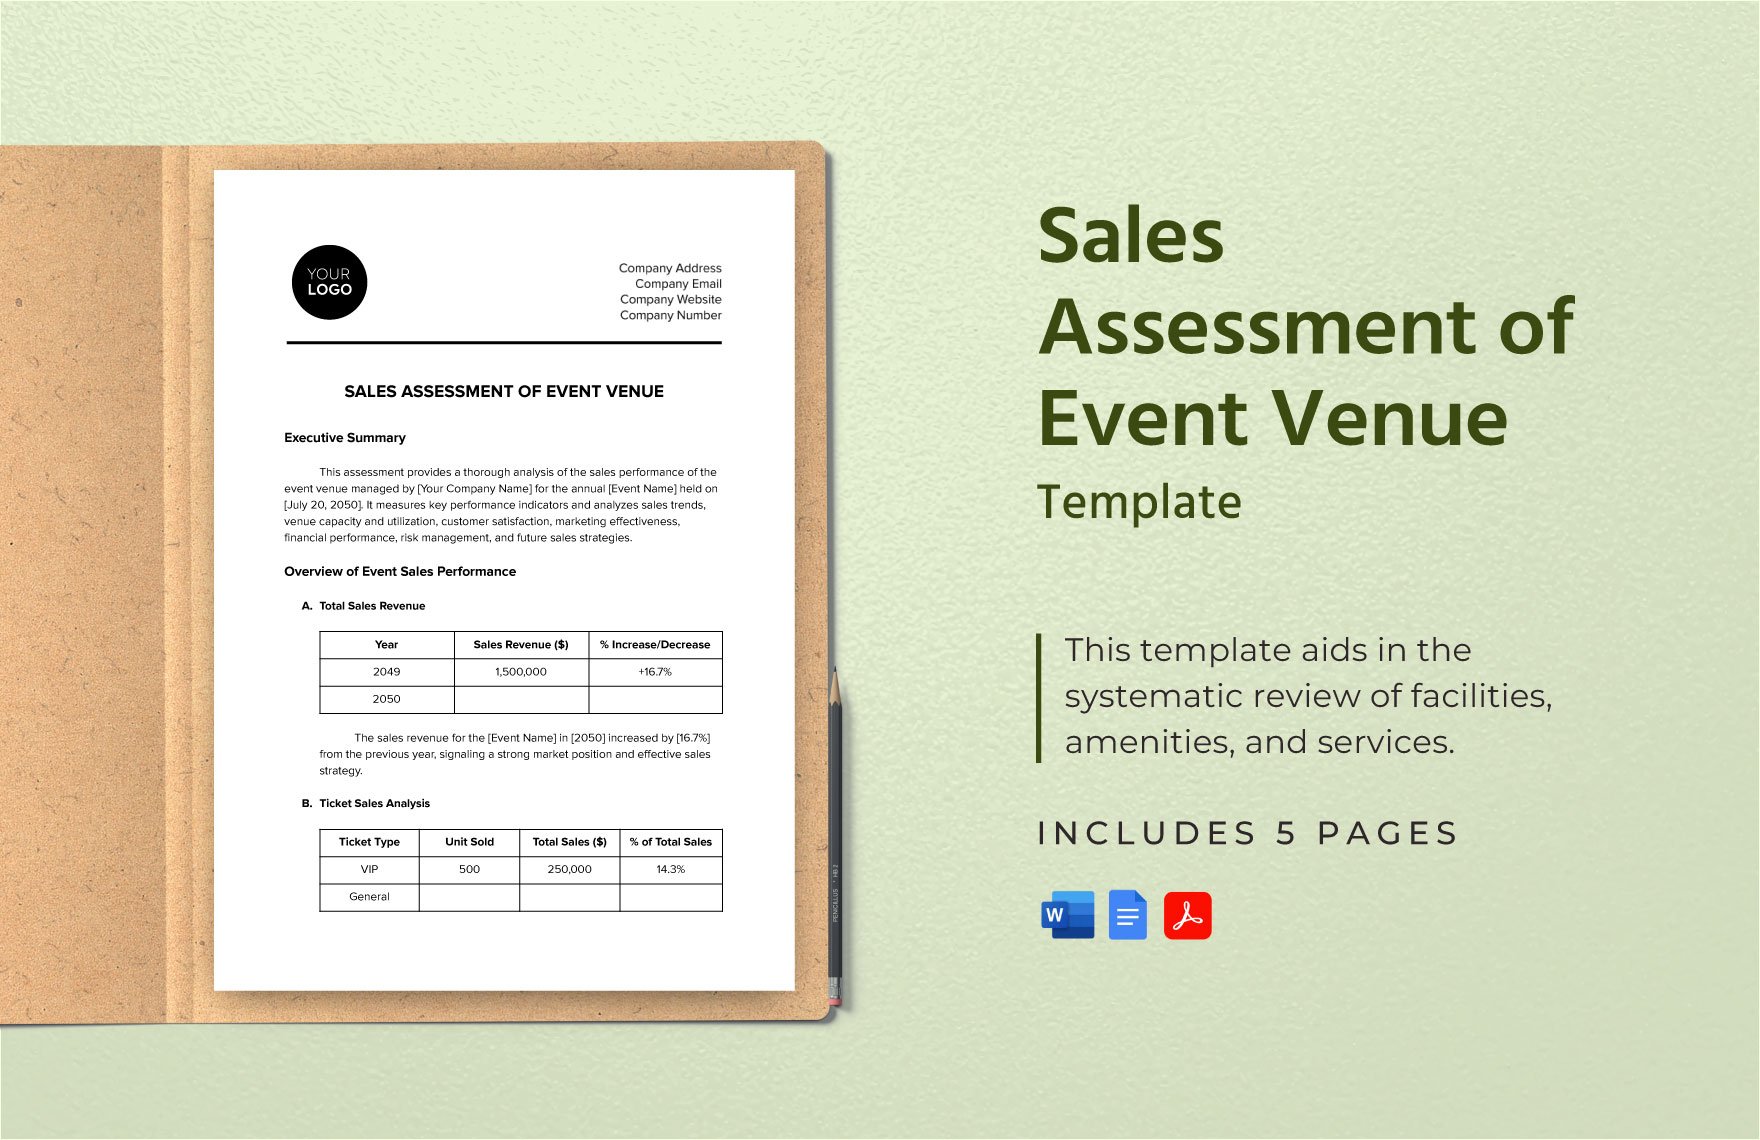 Sales Assessment of Event Venue Template